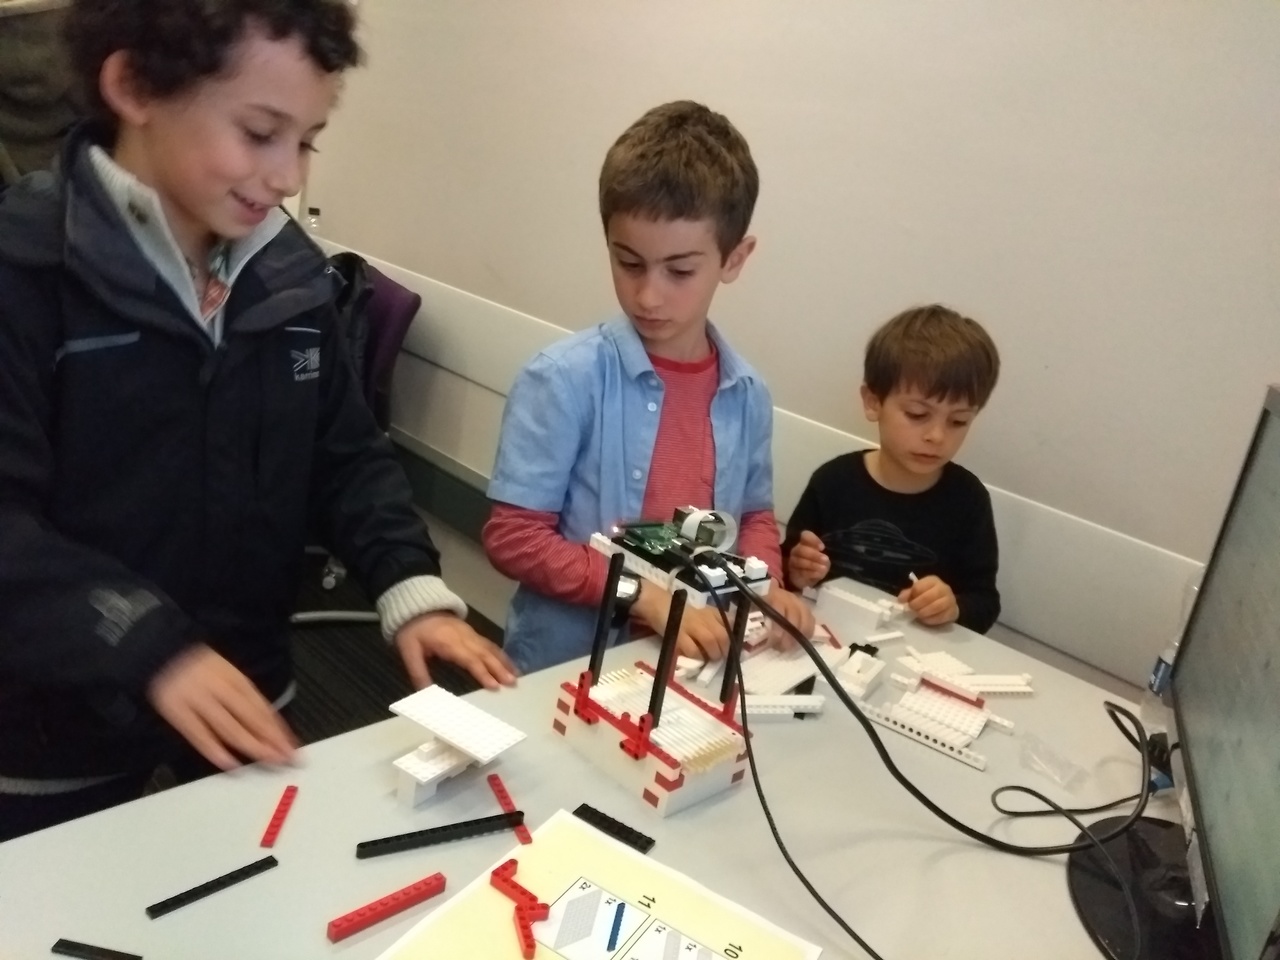 Children building their own LEGOscope at the Imperial Festival 2018